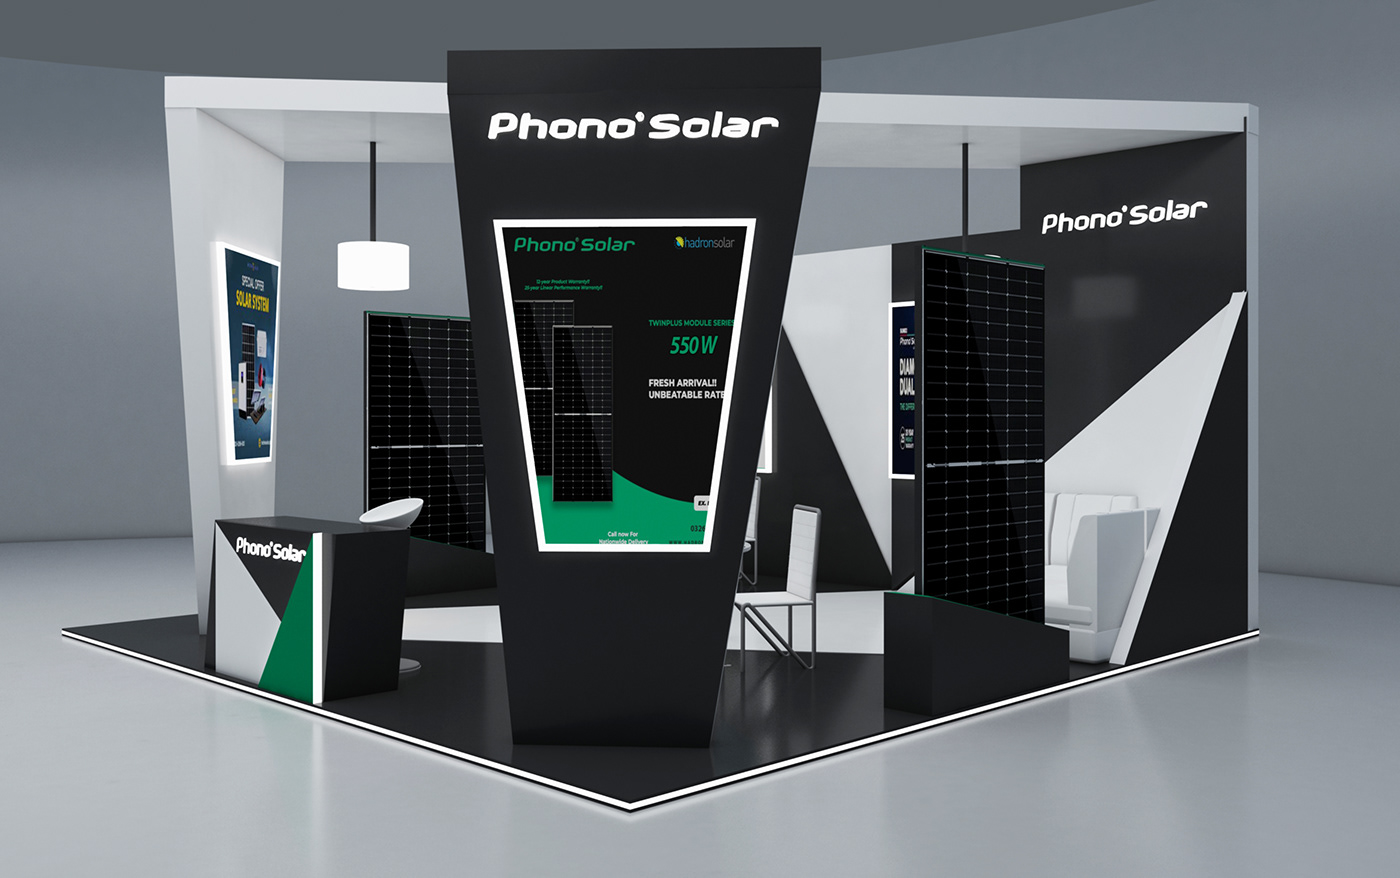 3ds max architecture Render expo Exhibition  Stand brand identity Solar energy Renders 3D